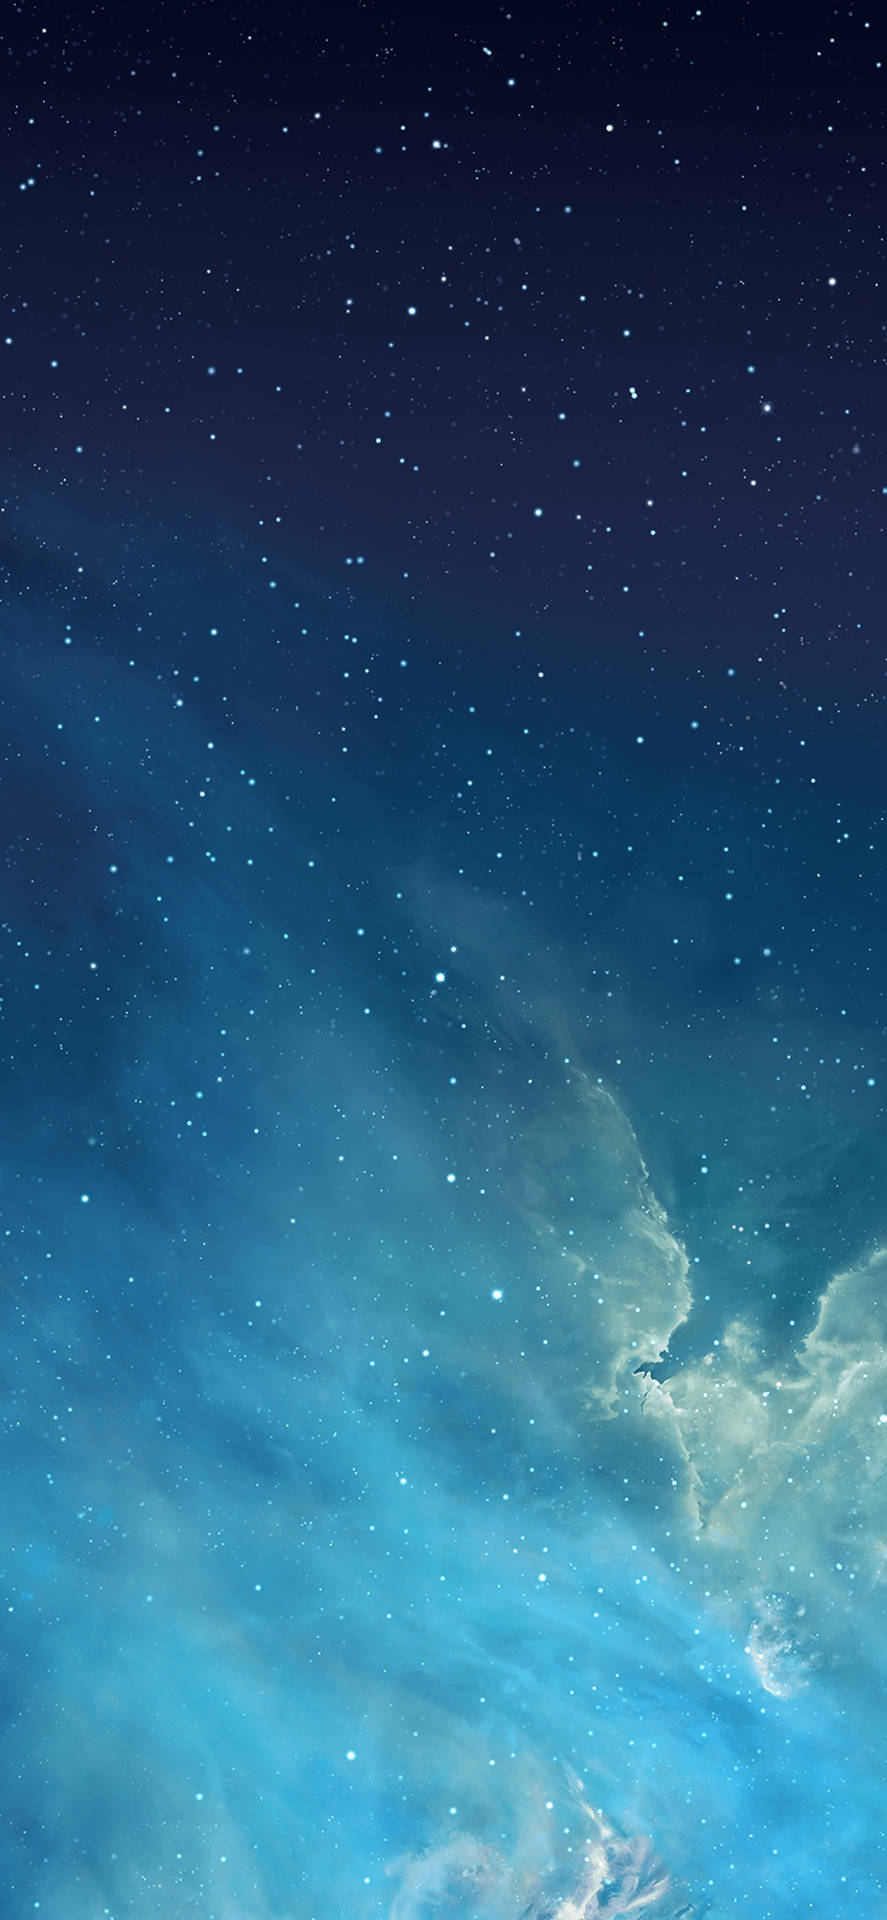 Refreshing Blue Sky, Bright Stars, And The Iconic Apple Logo Background